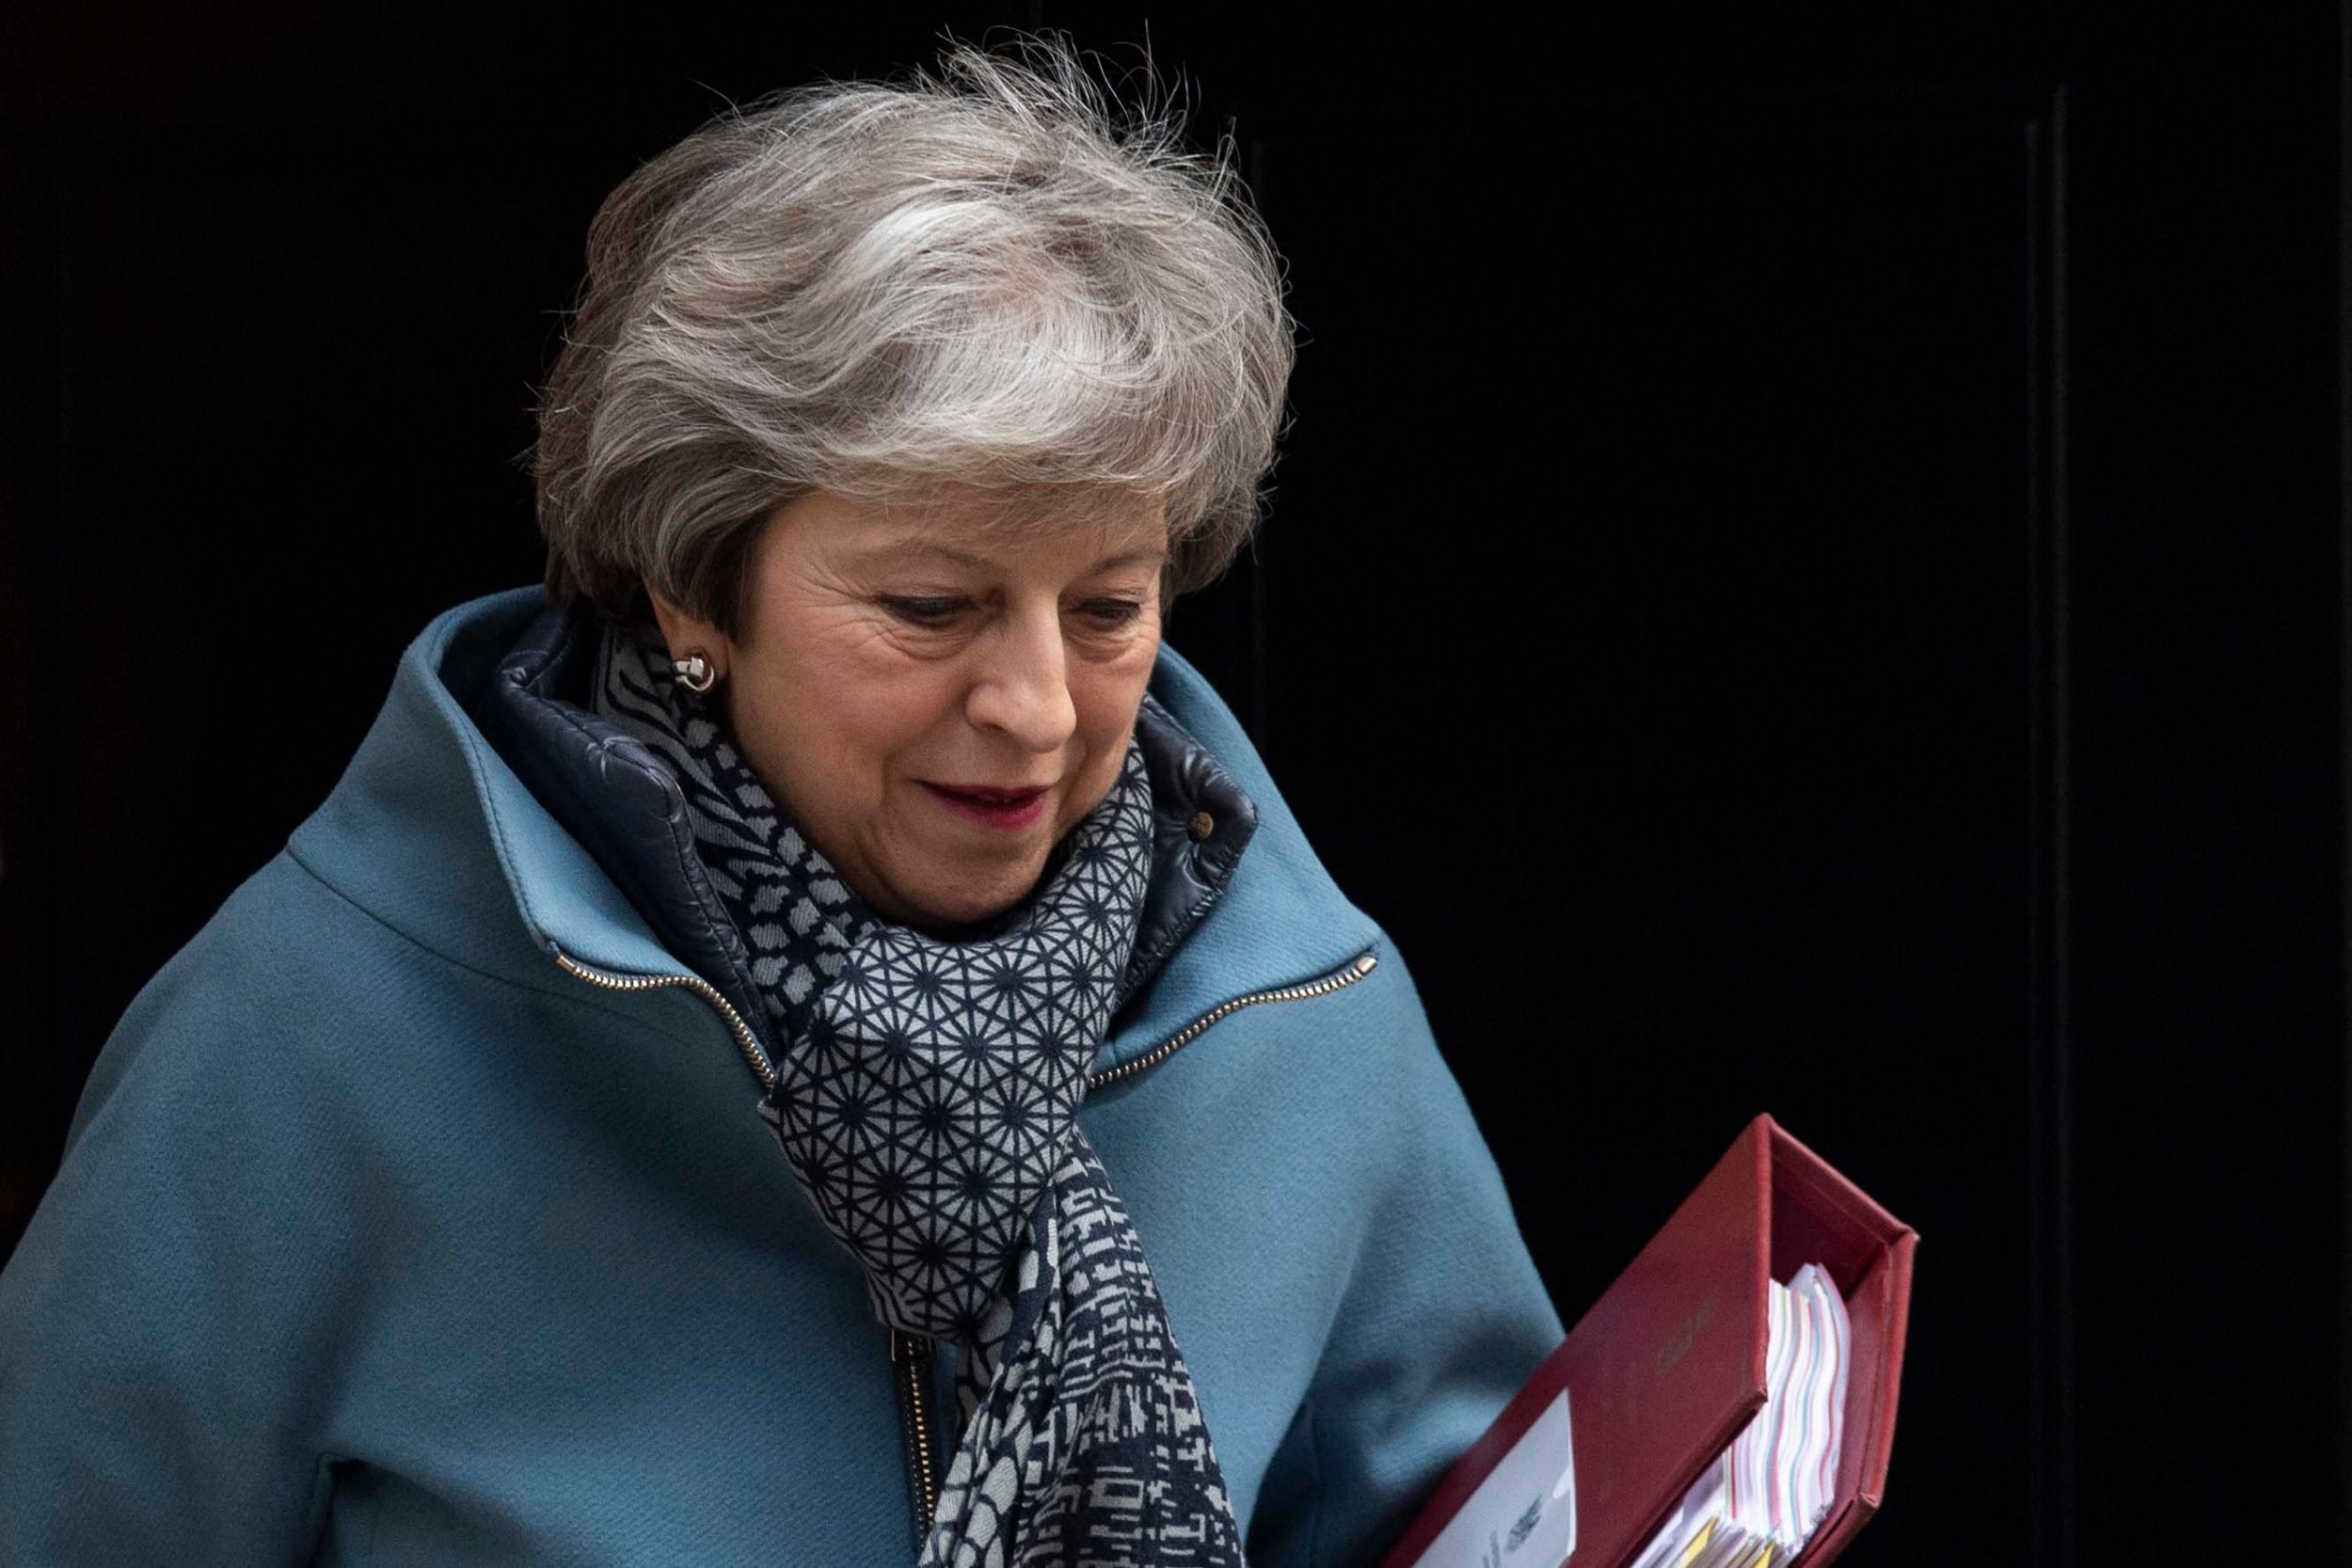 Brexit: Theresa May hints she will request removal of Irish backstop after Tory Eurosceptics&apos; demands, despite EU repeatedly ruling out rethink